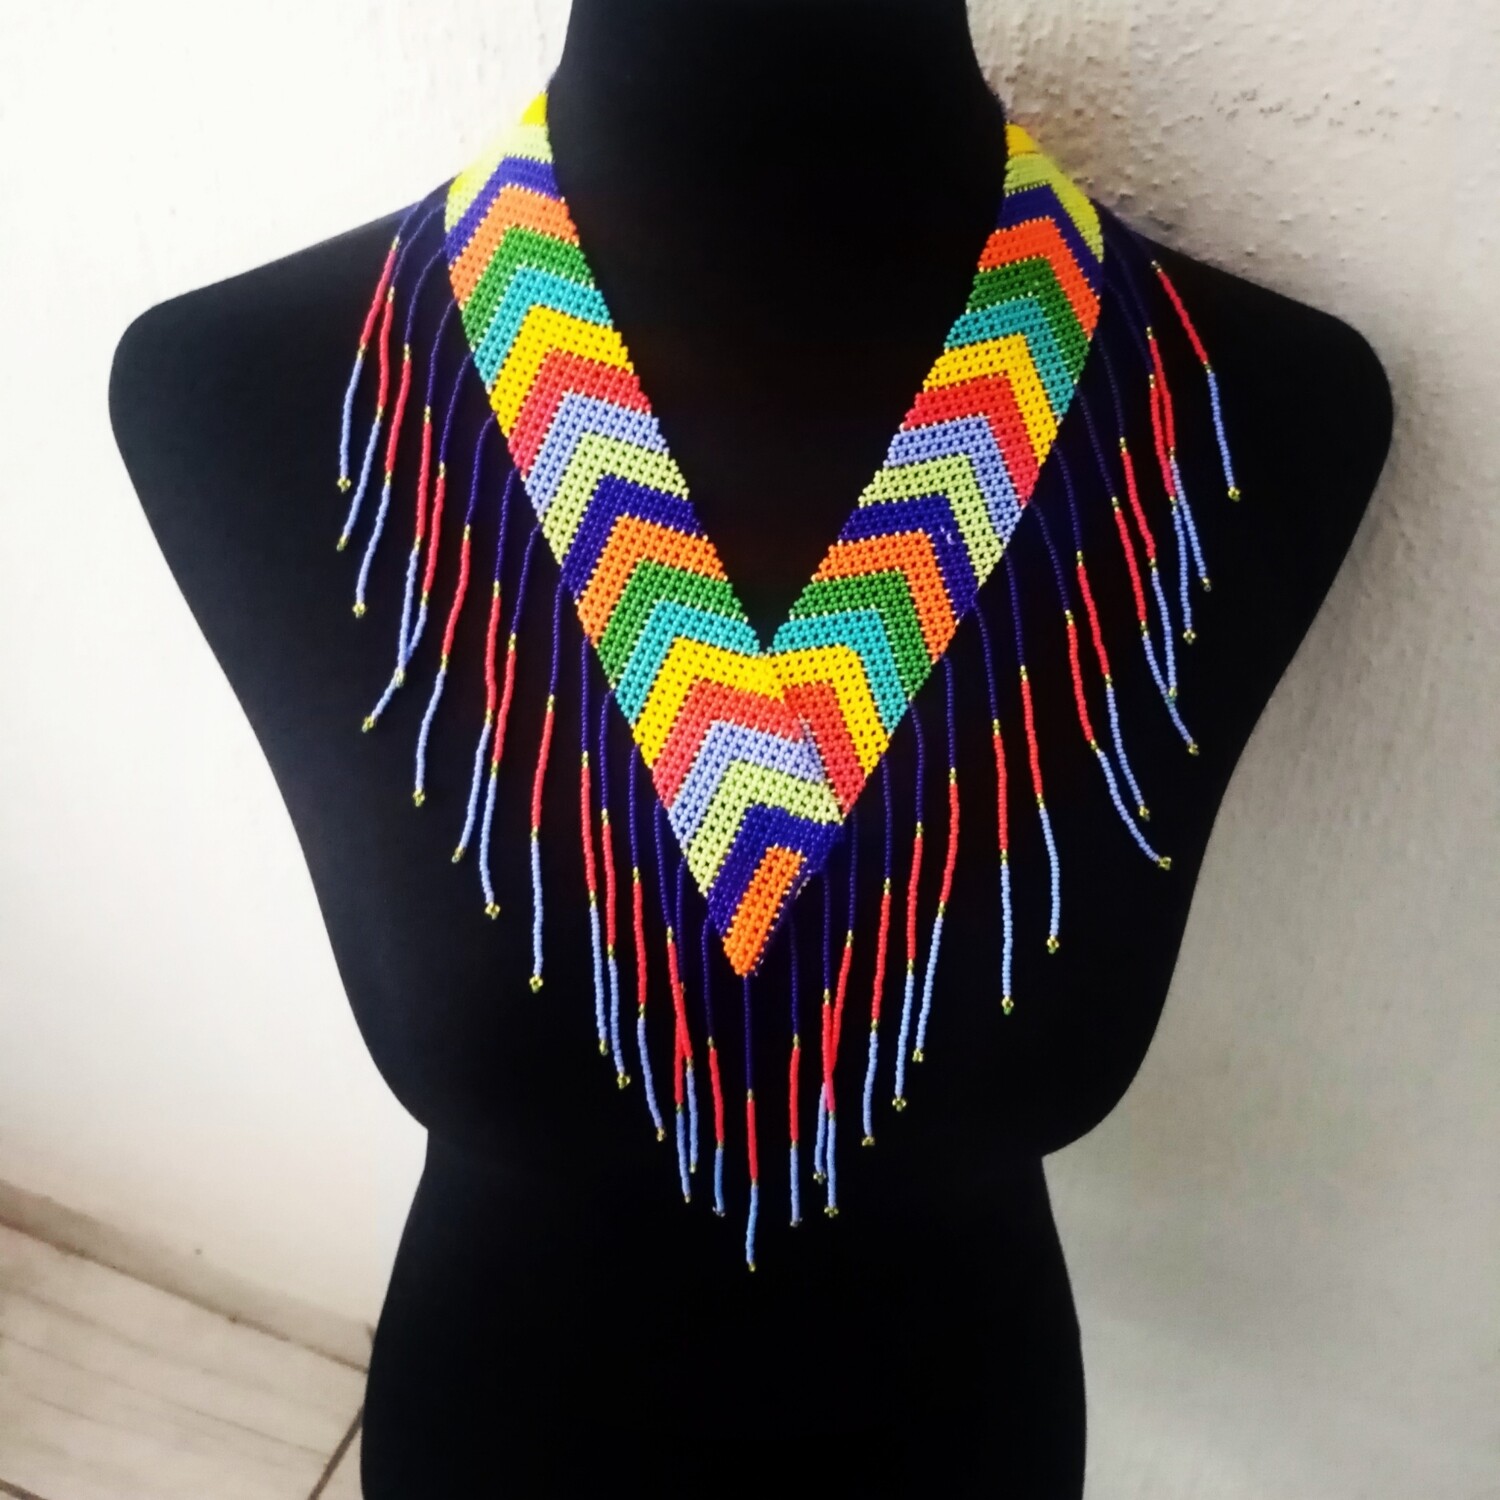 Beaded "V" neck piece with tassel detail